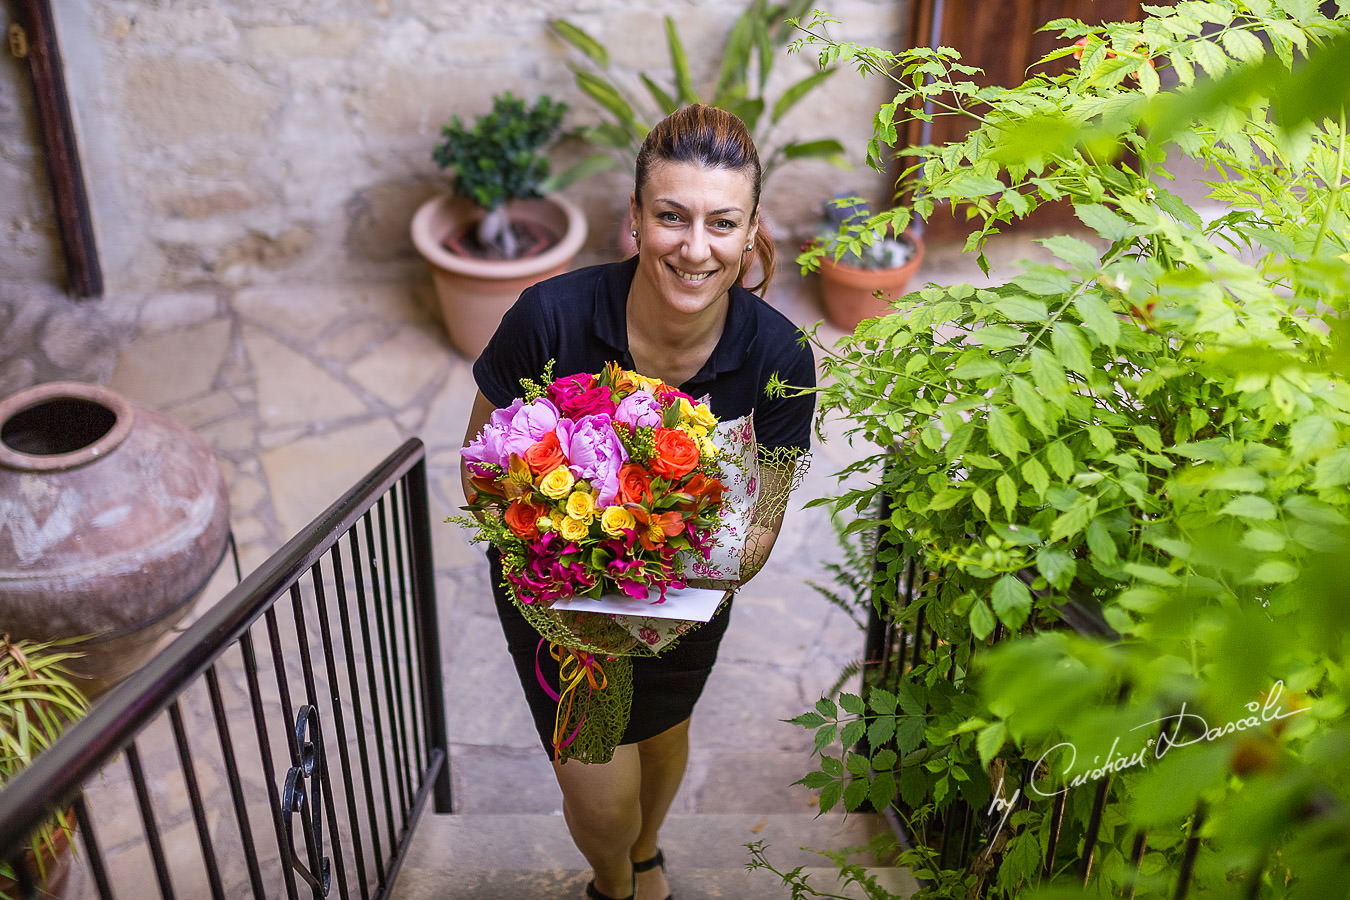 A beautiful wedding day at the Vasilias Nikoklis Inn in Paphos, captured by Cristian Dascalu. Chris, the Inn's owner is bringing the bridal bouquet to Sarah.